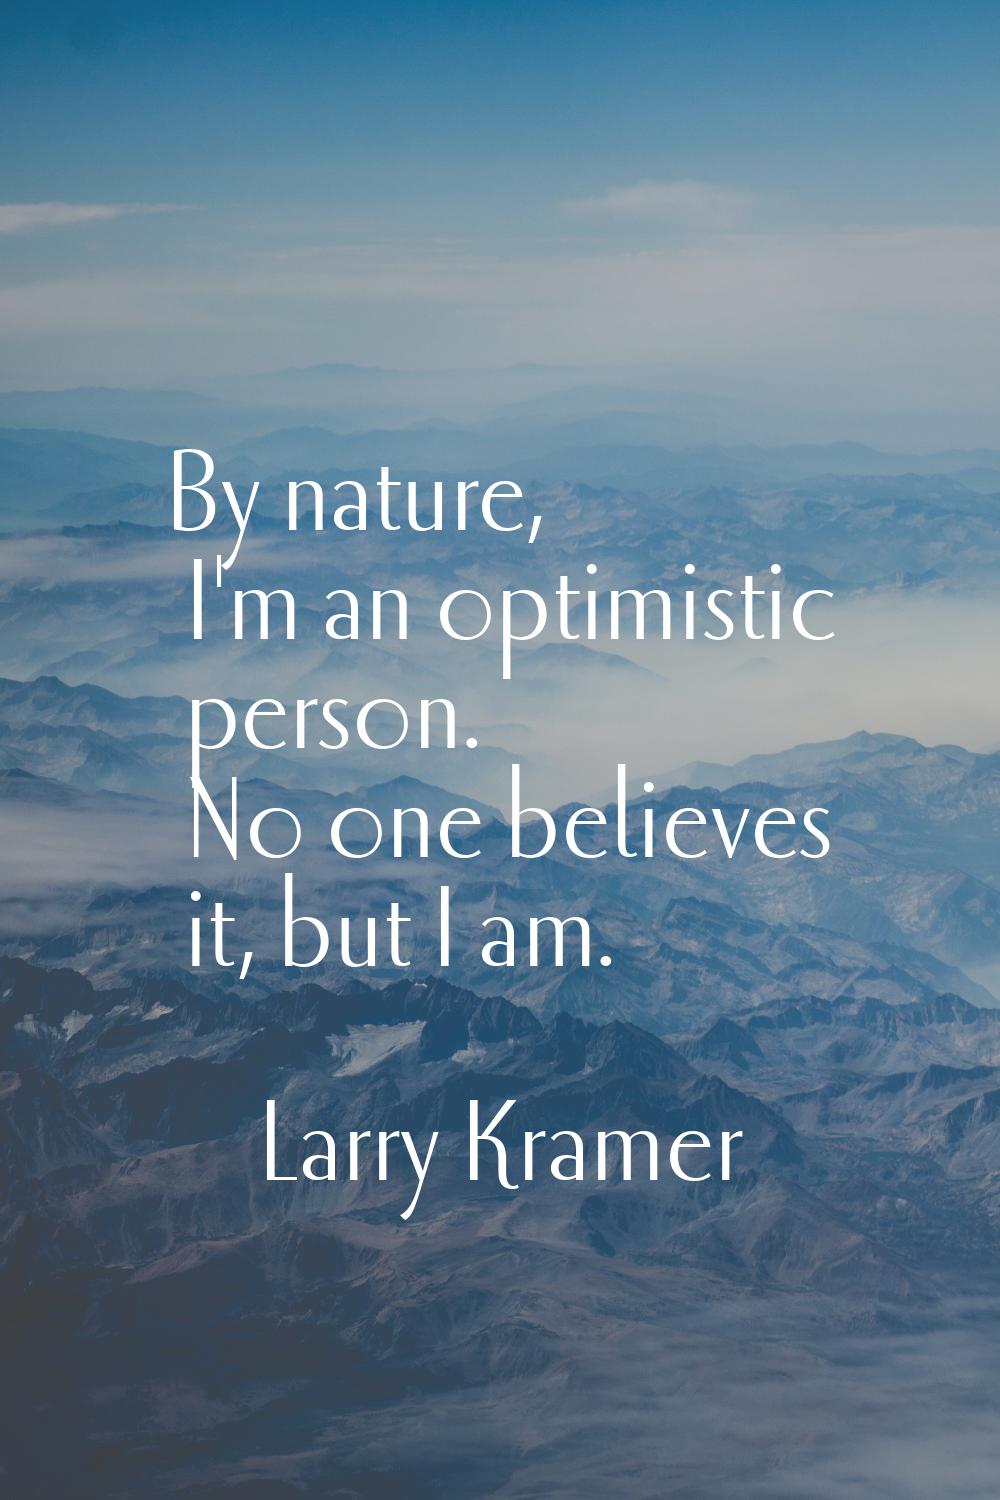 By nature, I'm an optimistic person. No one believes it, but I am.